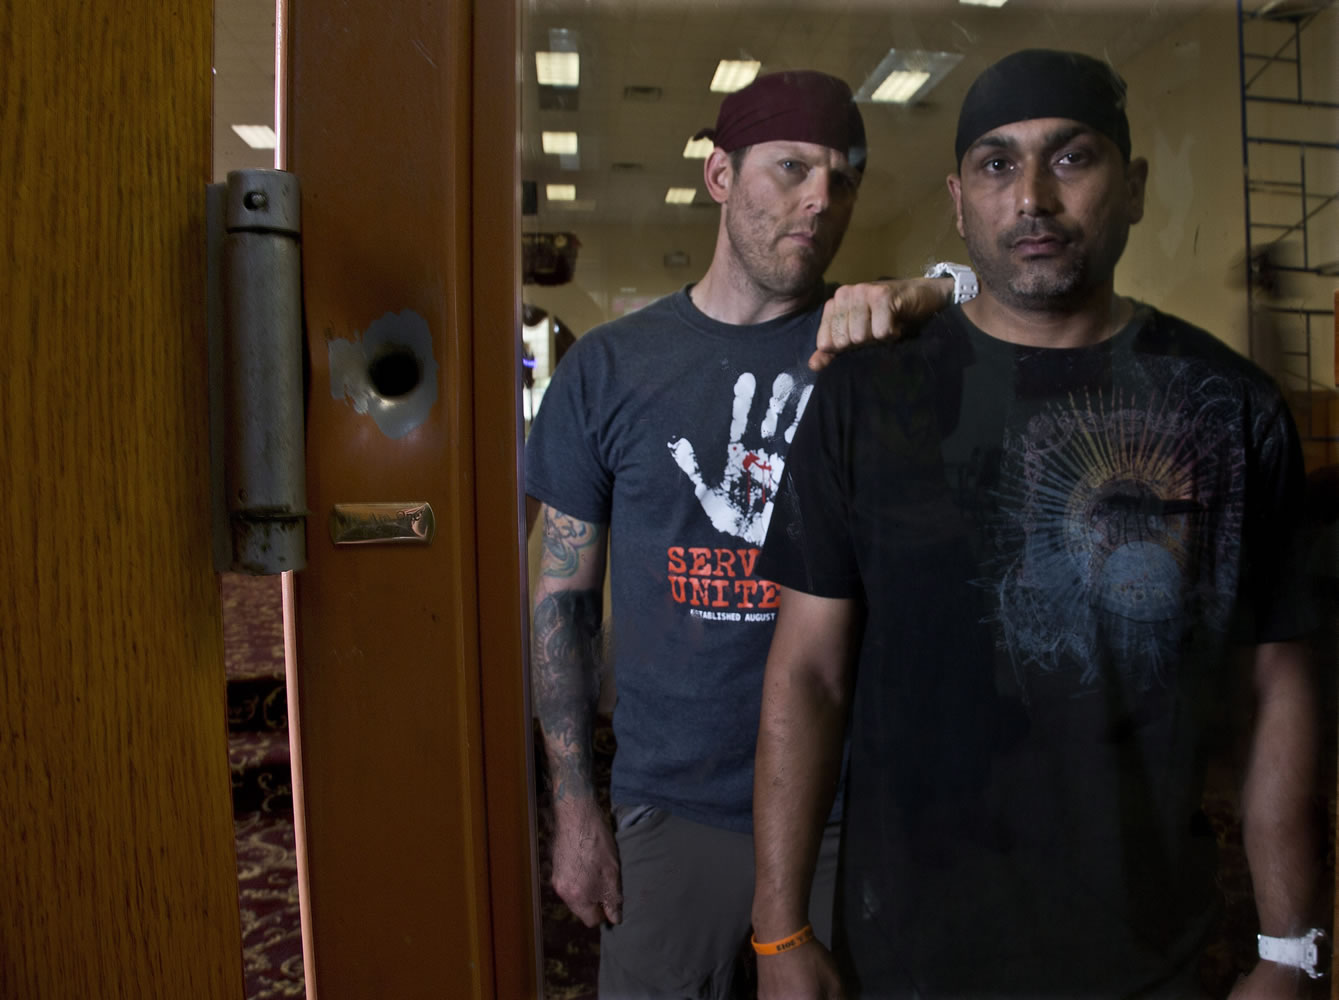 Pardeep Kaleka, right, and Arno Michaelis stand next to a bullet hole Wednesday at the Sikh Temple of Wisconsin in Oak Creek, Wis.